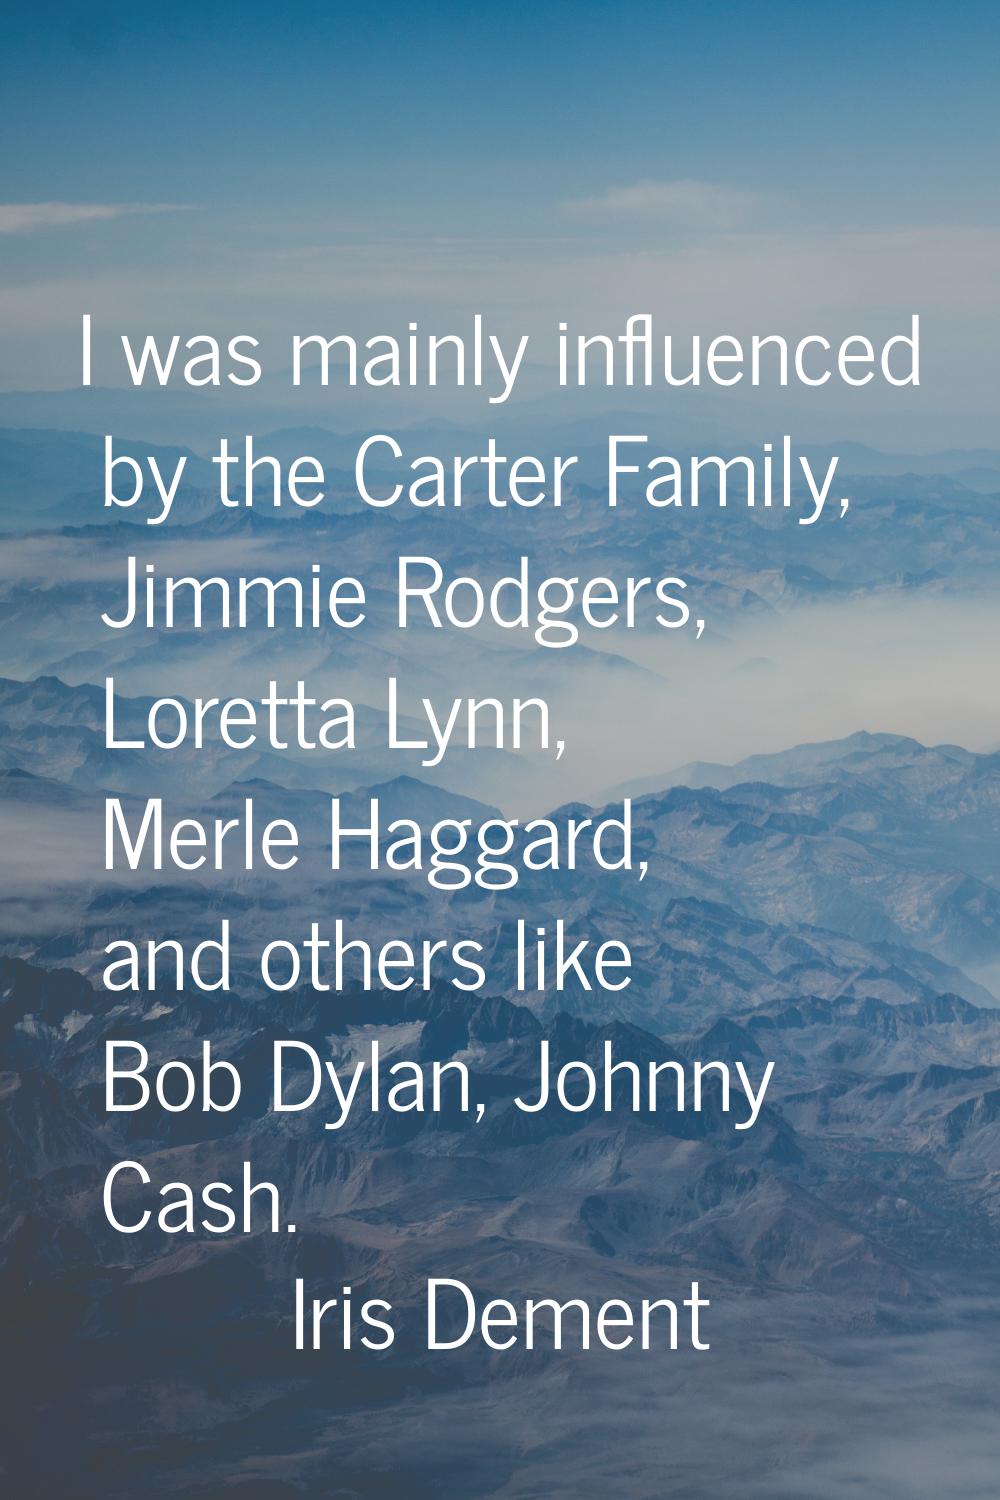 I was mainly influenced by the Carter Family, Jimmie Rodgers, Loretta Lynn, Merle Haggard, and othe